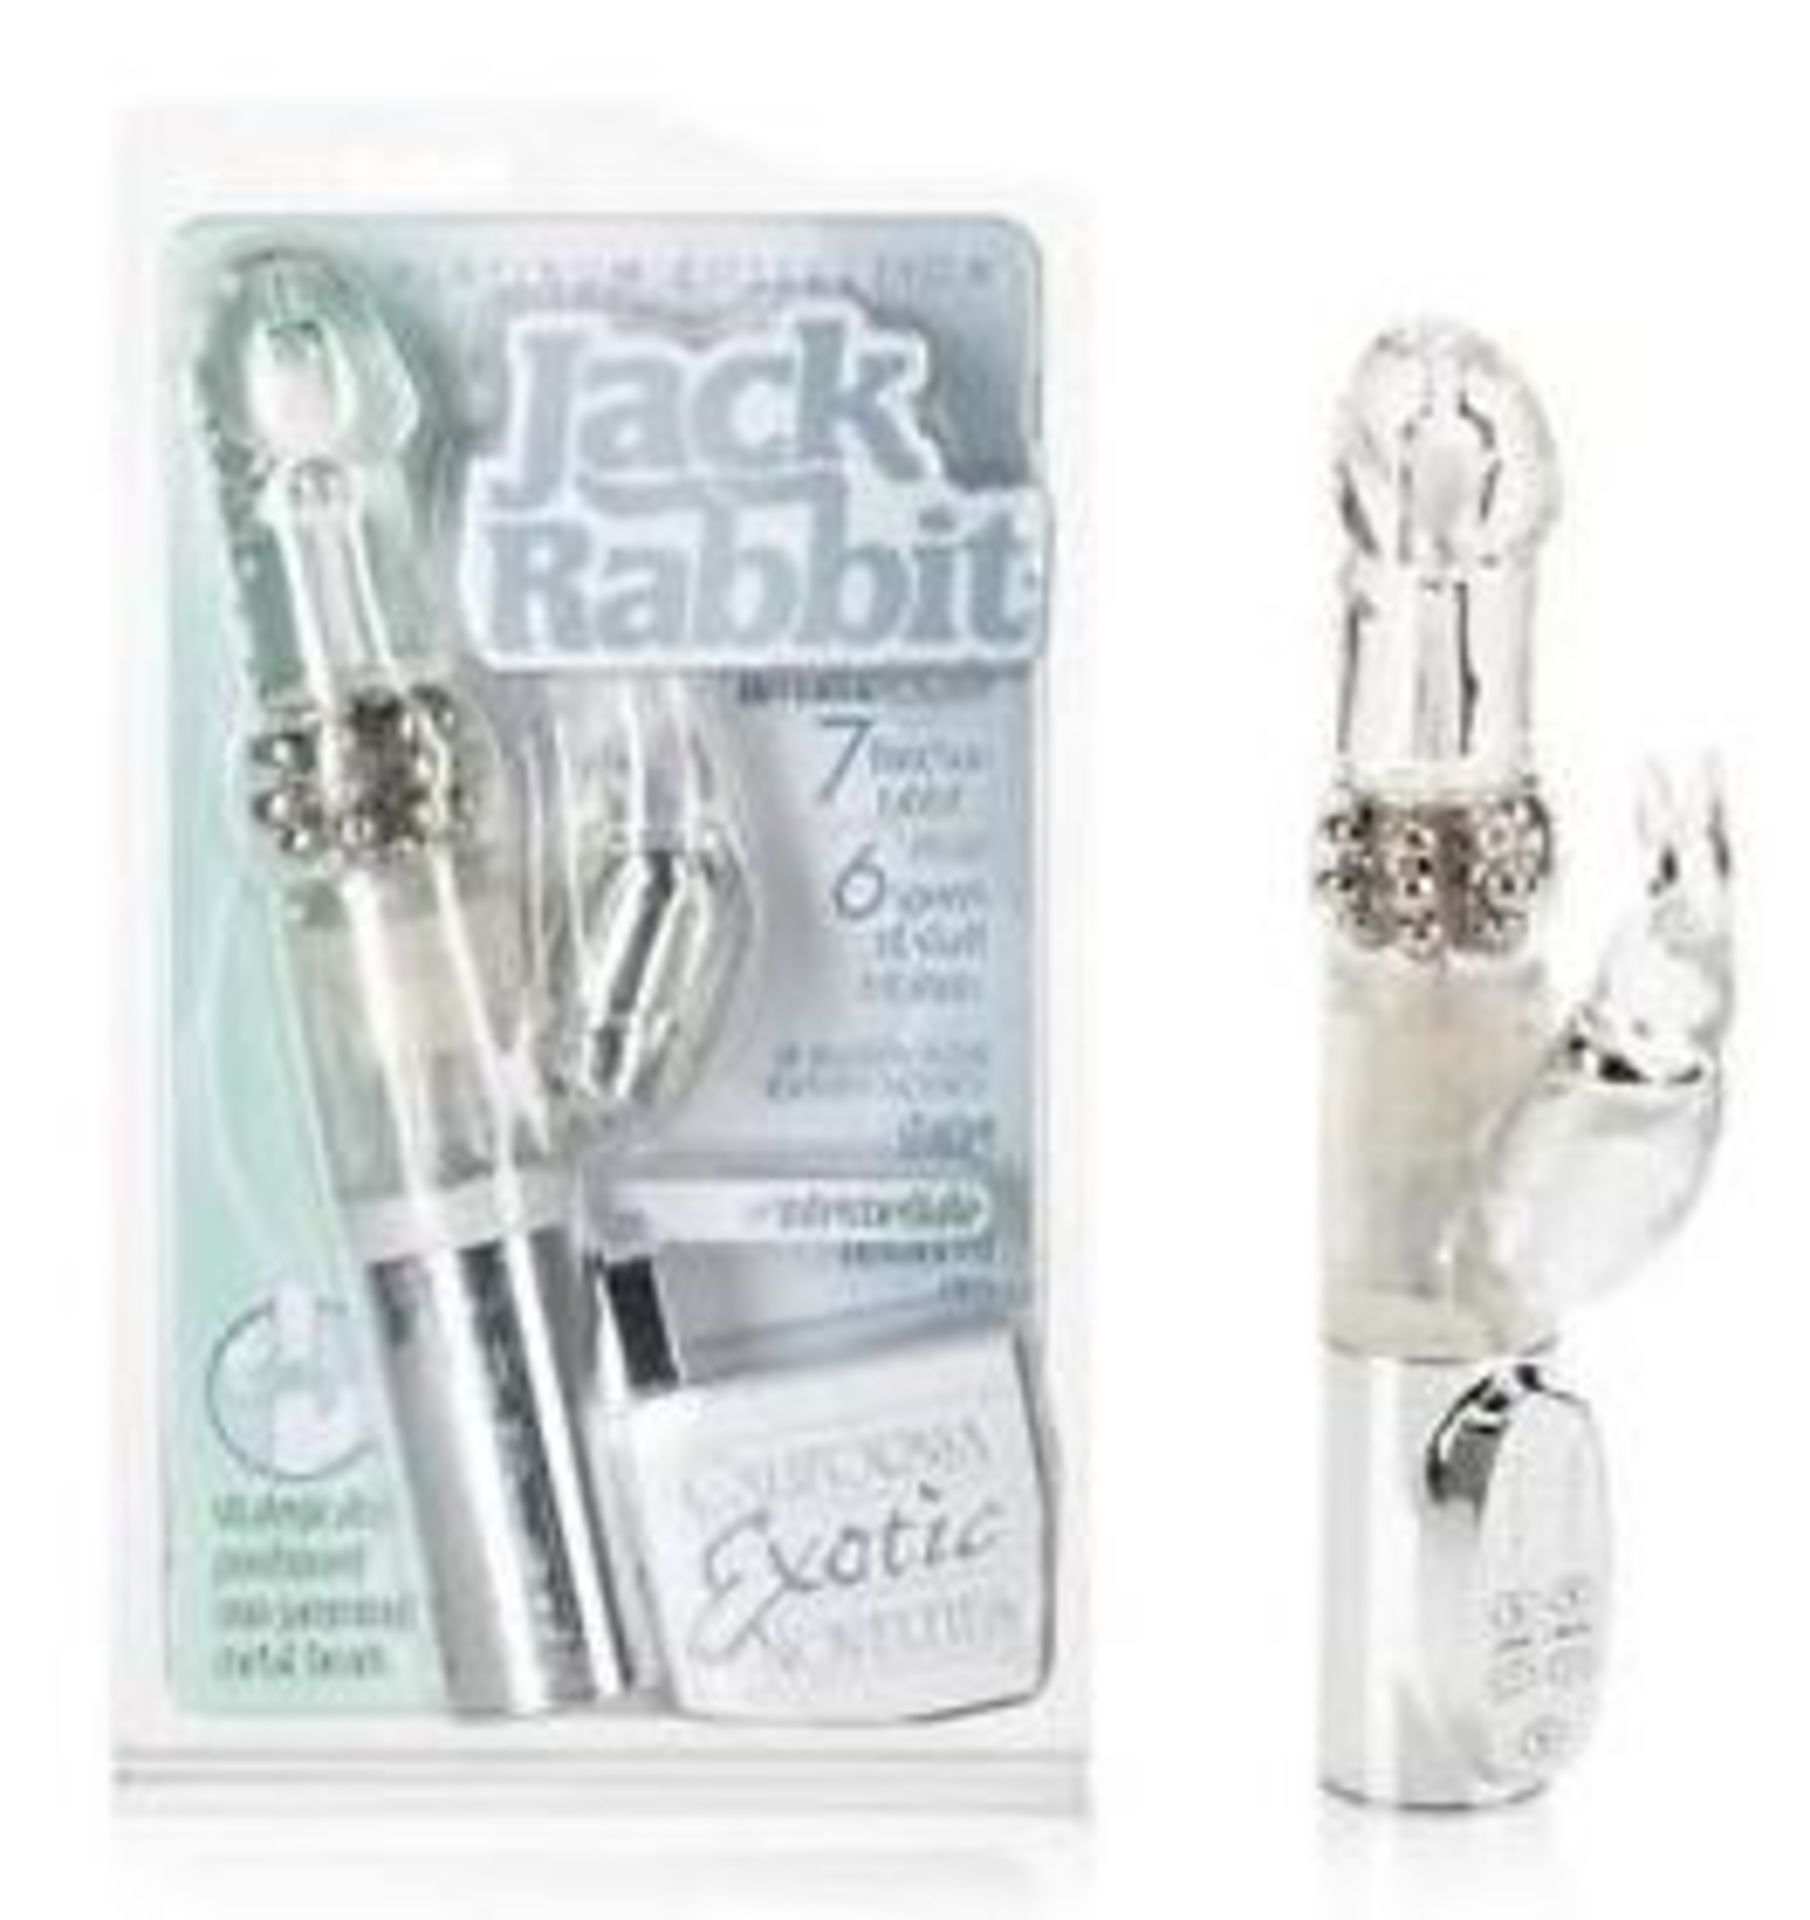 1 AS NEW BOXED JACK RABBIT PLATINUM COLLECTION VIBRATOR IN SILVER / £48.82 (CONFIDENTIAL DELIVERY